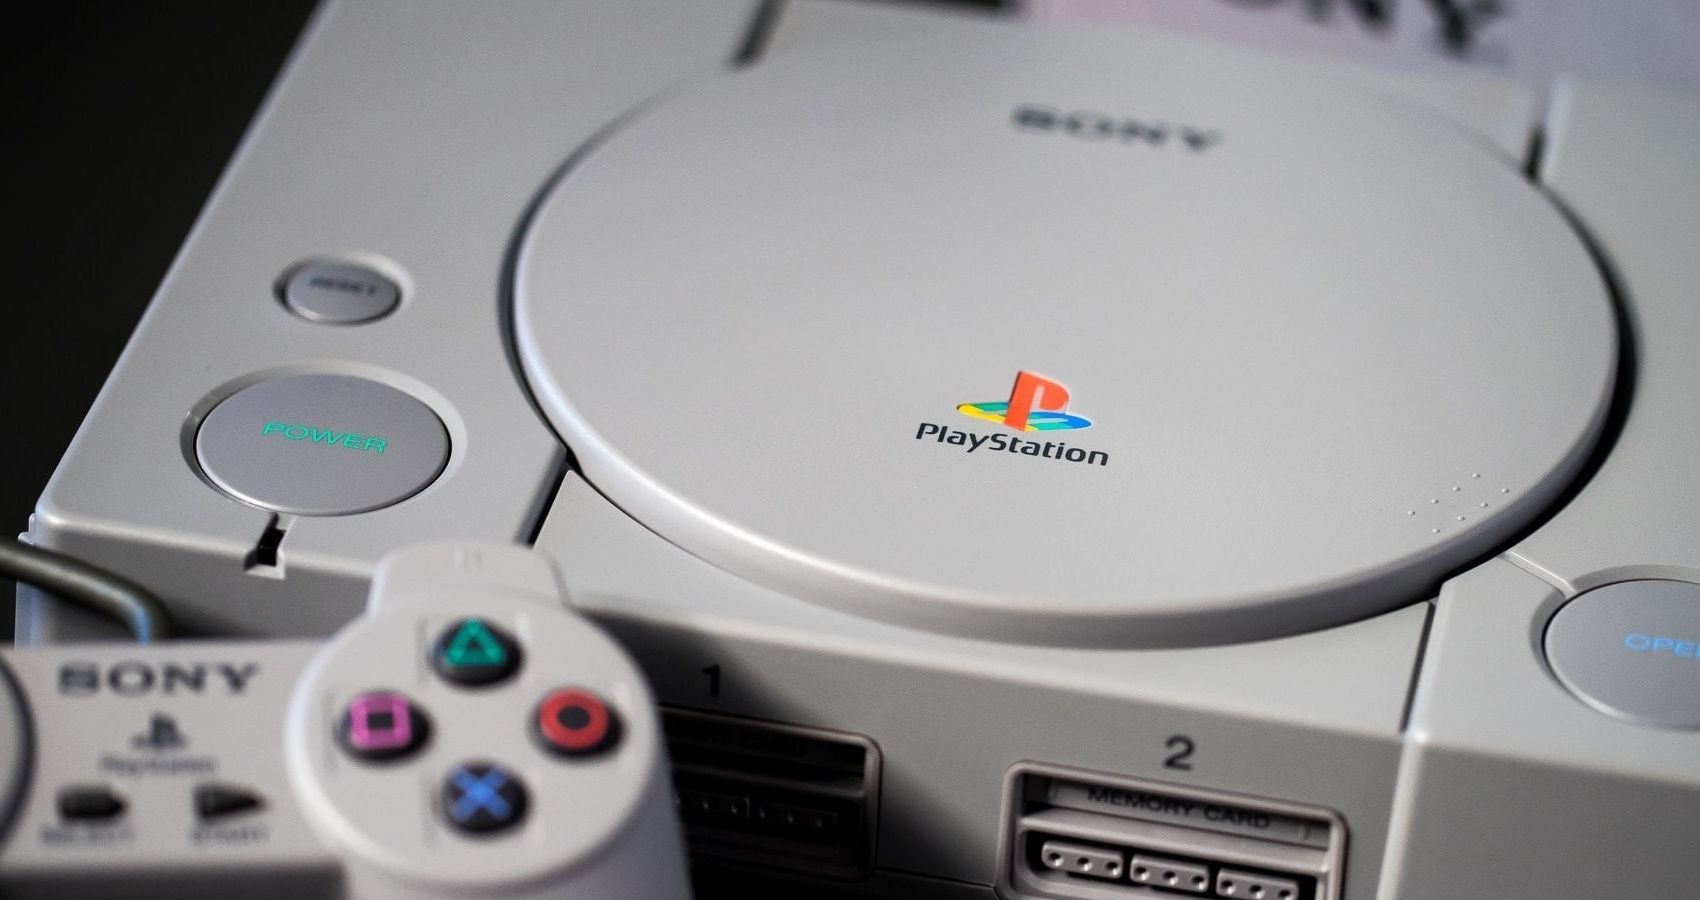 26 years ago, a cult-classic PS1 game helped launch a Japanese